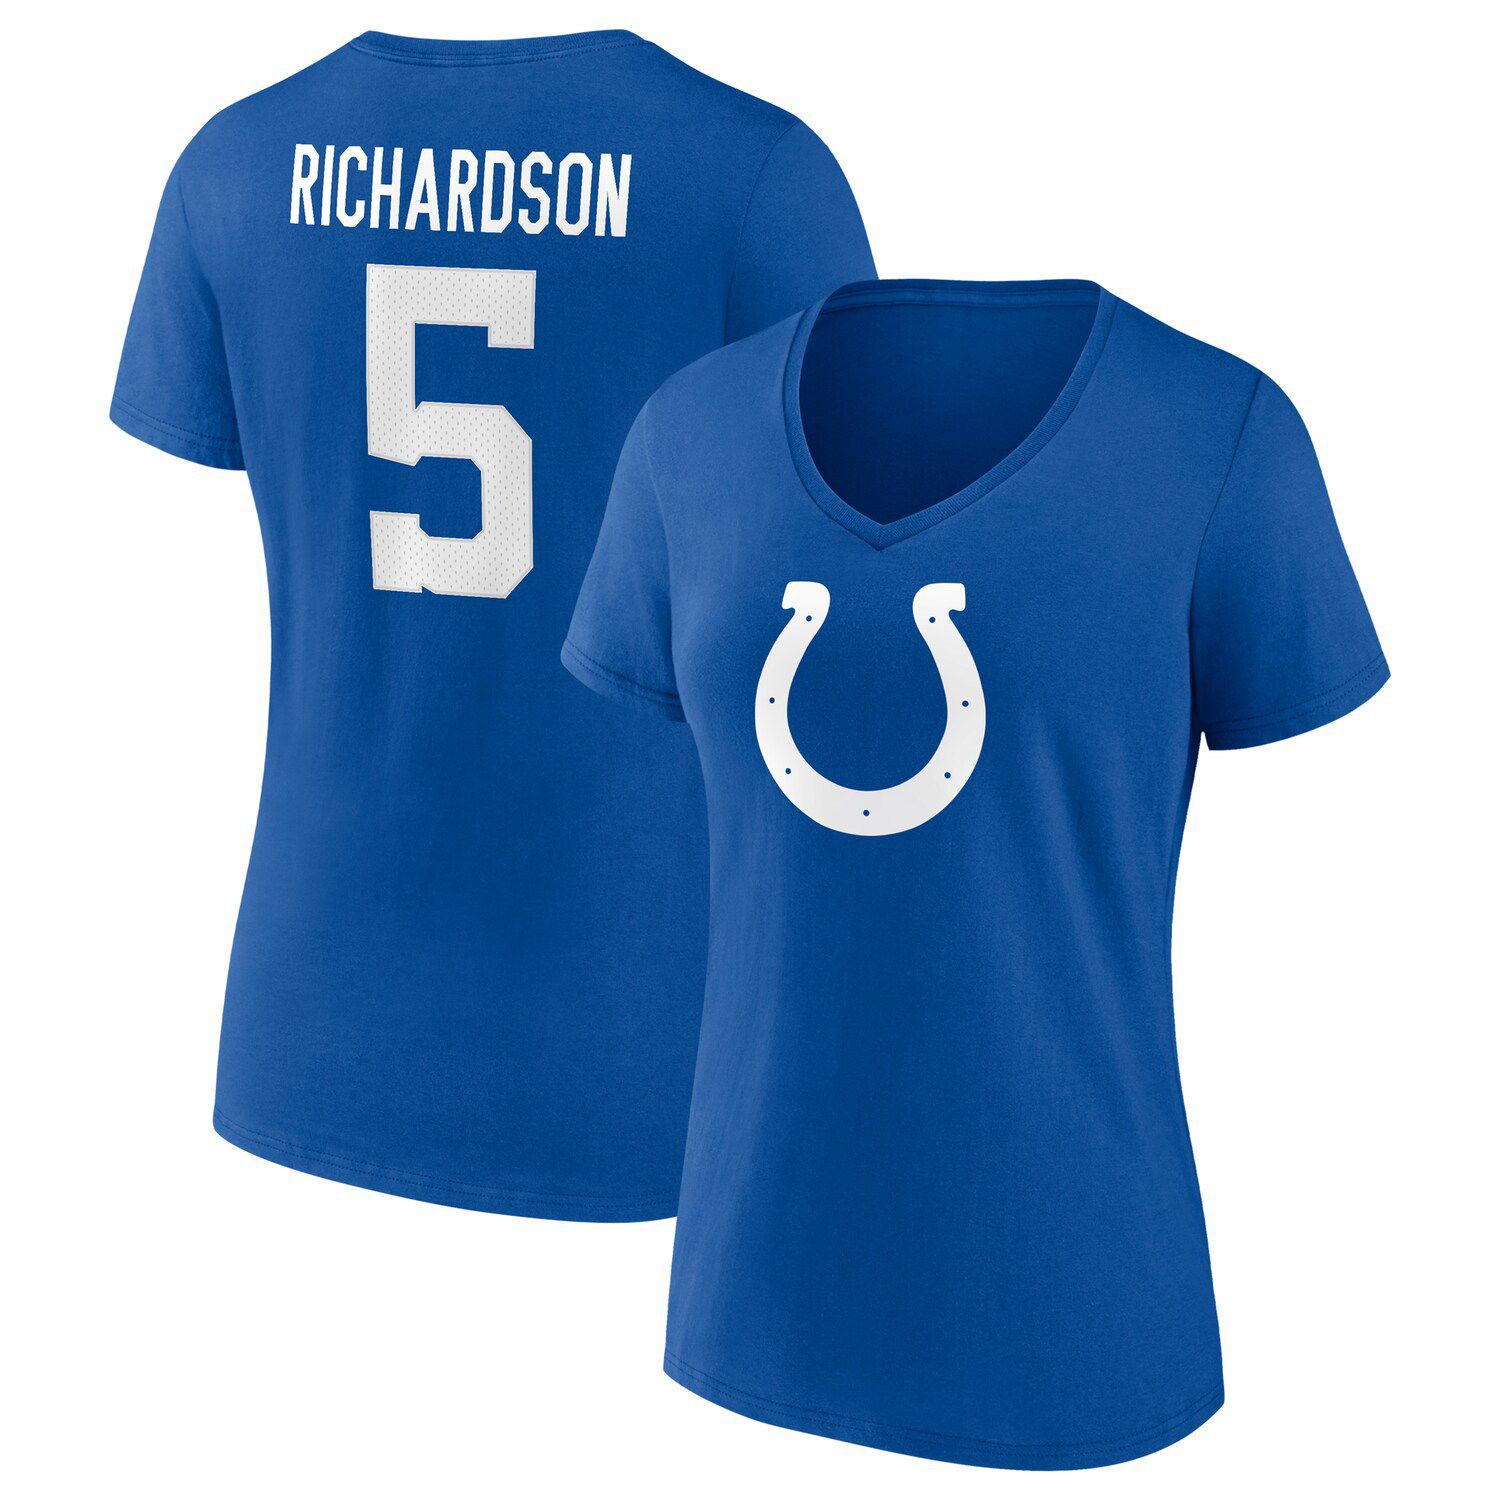 Indianapolis Colts legendary players shirts